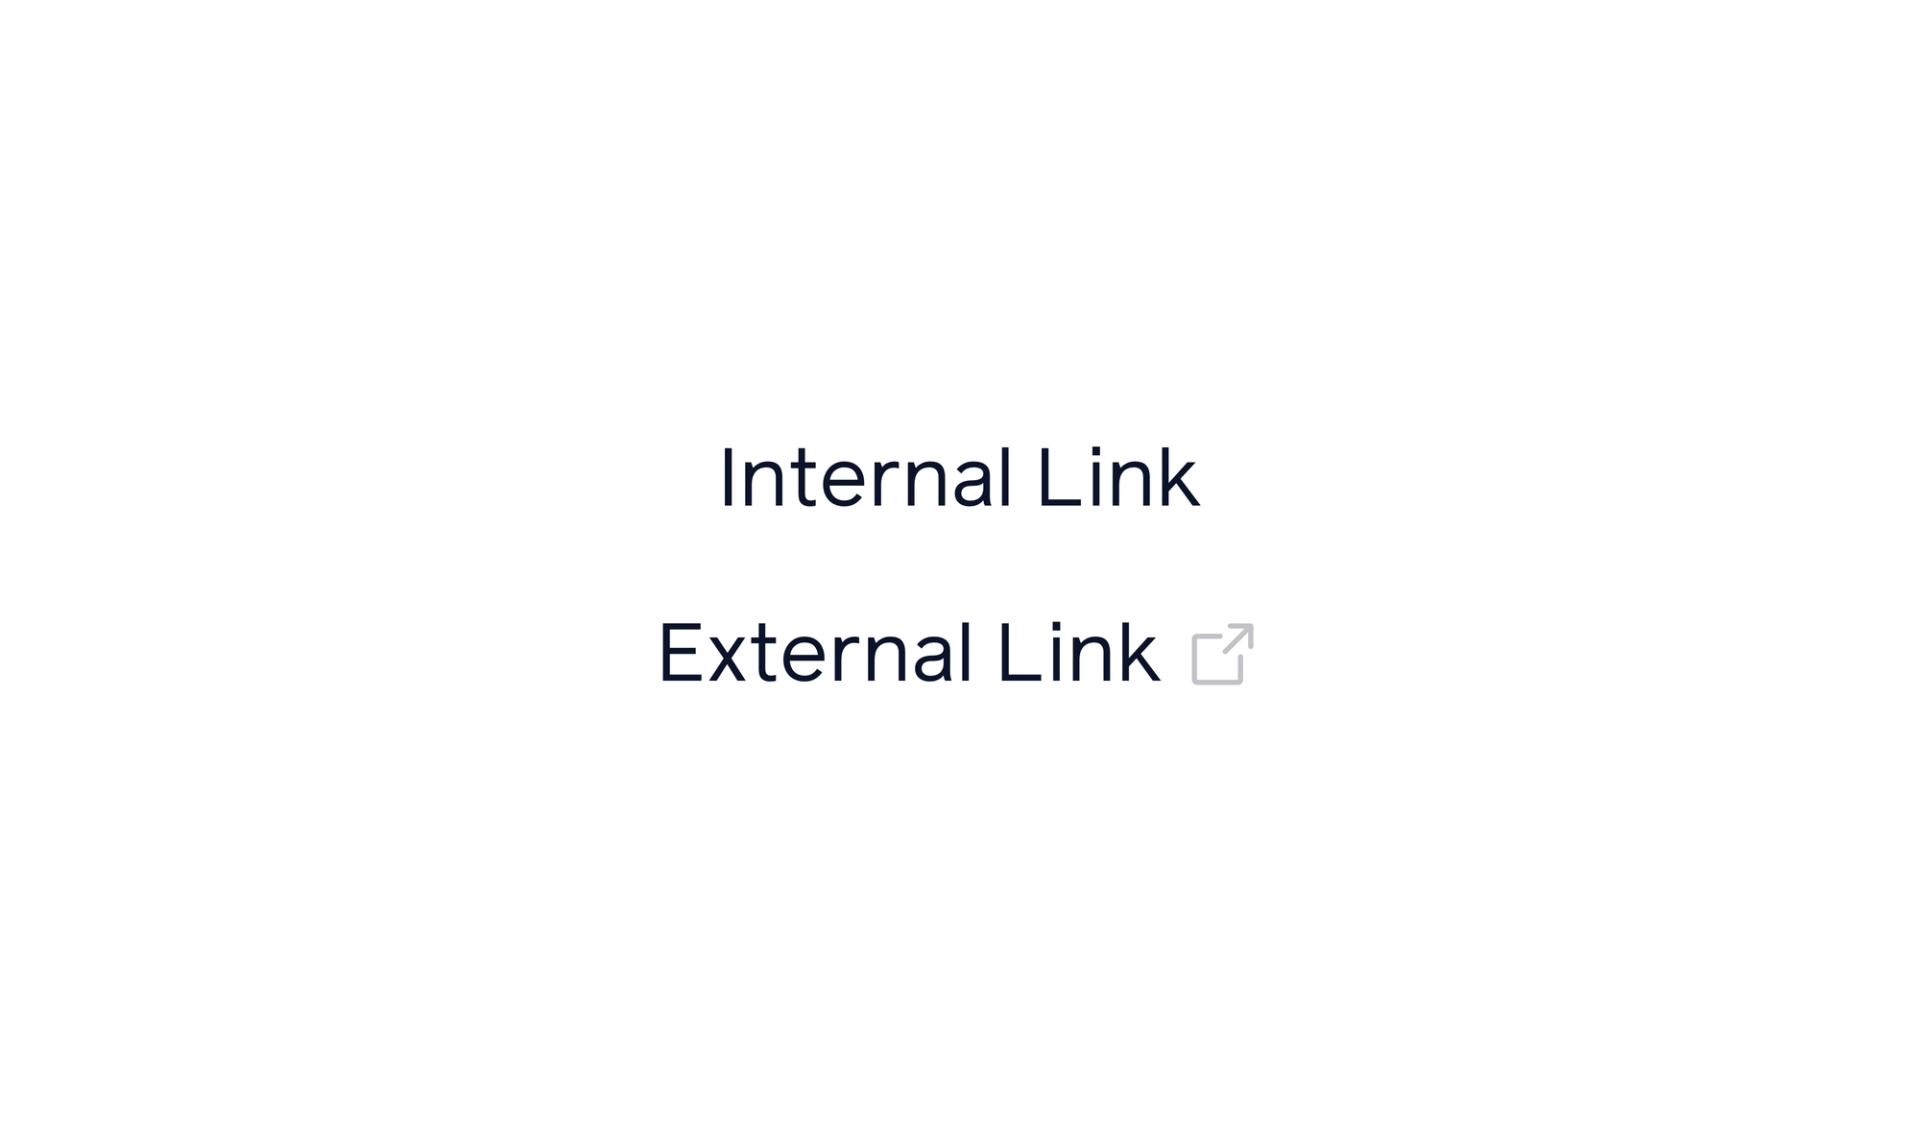 Internal and external page links with custom styling to show an icon next to the external link